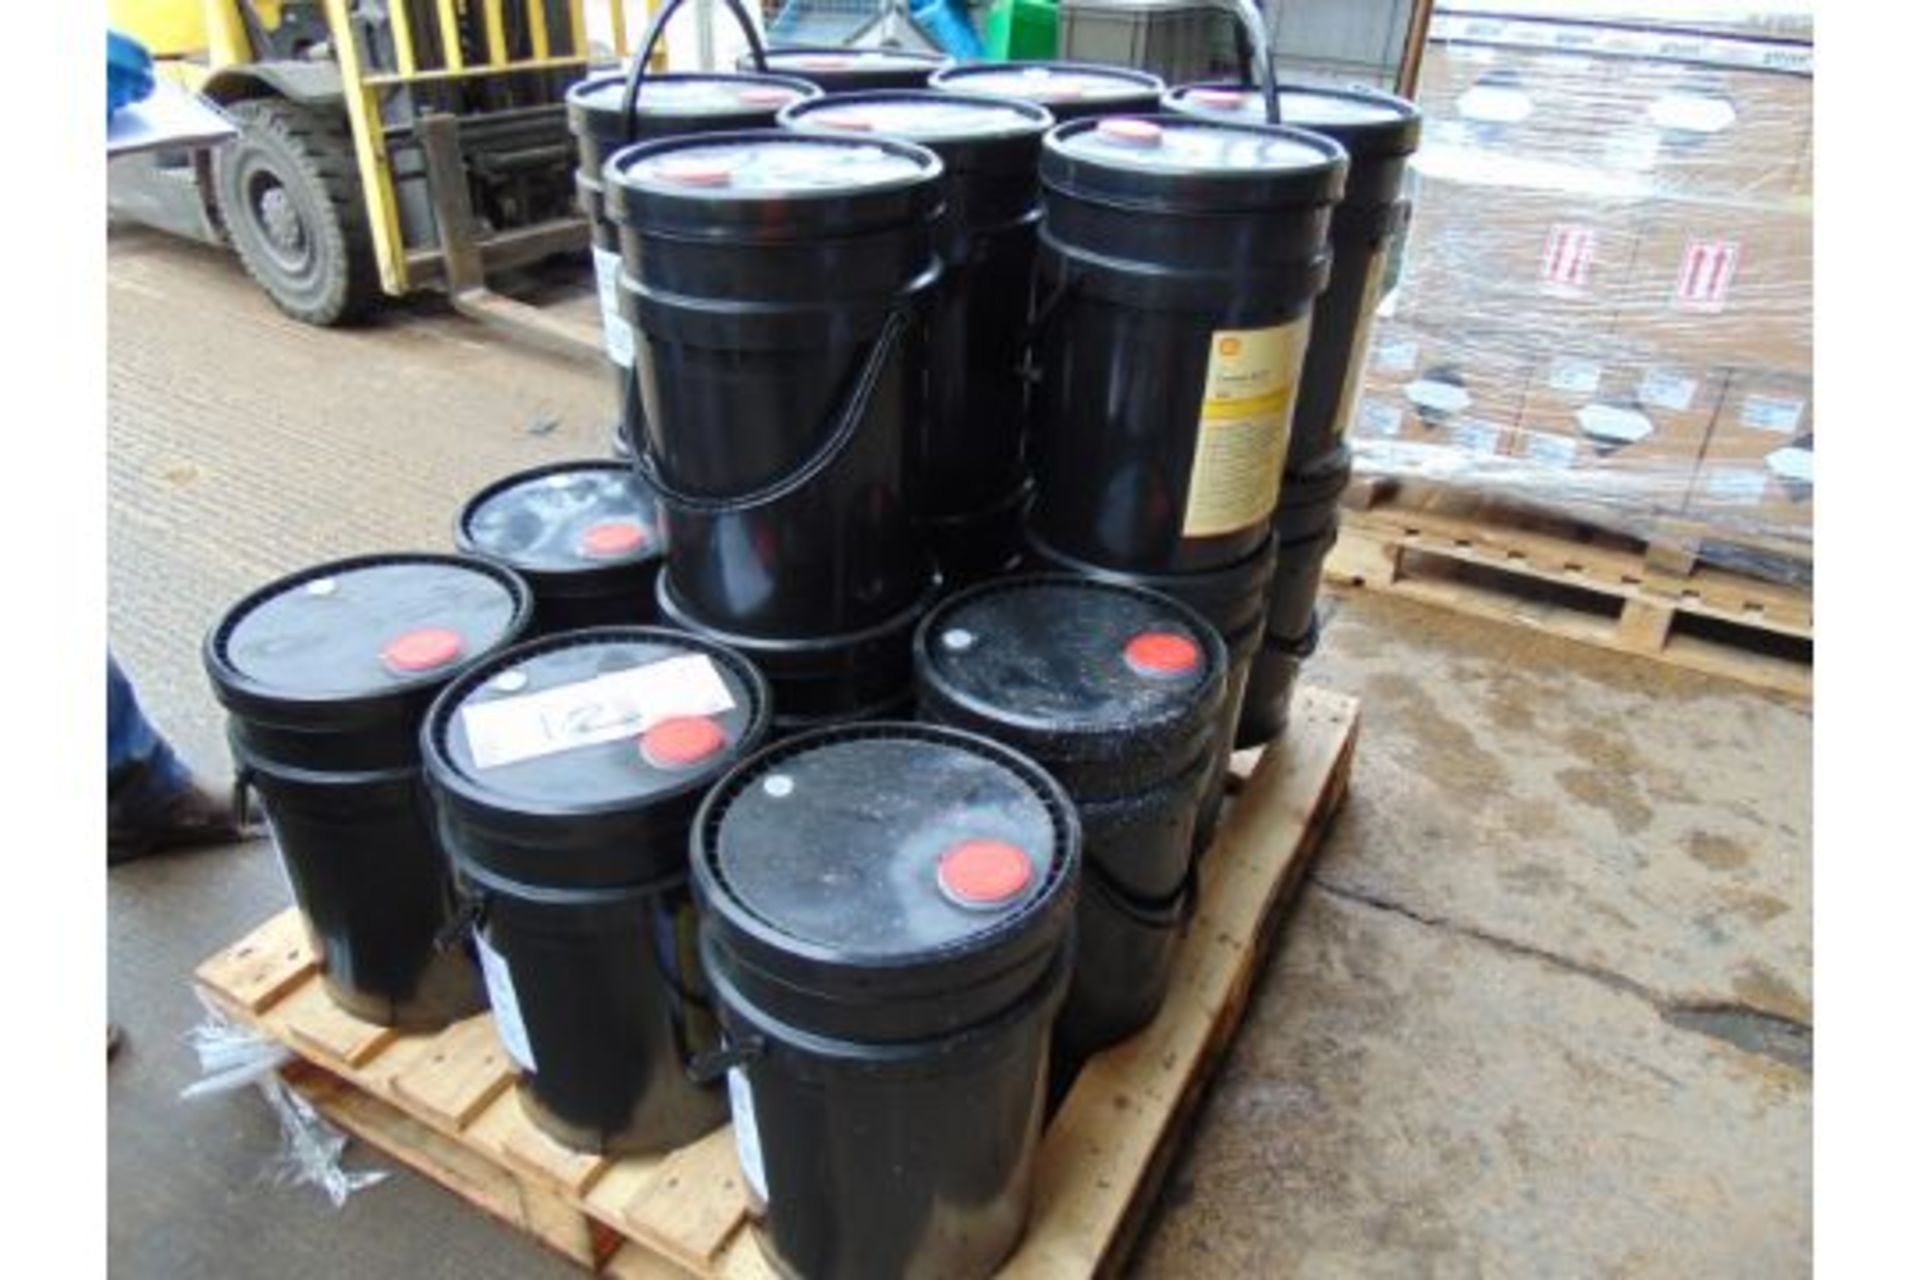 19 x 20 Litre Drums of Shell Corena S2 P100 High Quality Lubricating Oil - Image 5 of 5